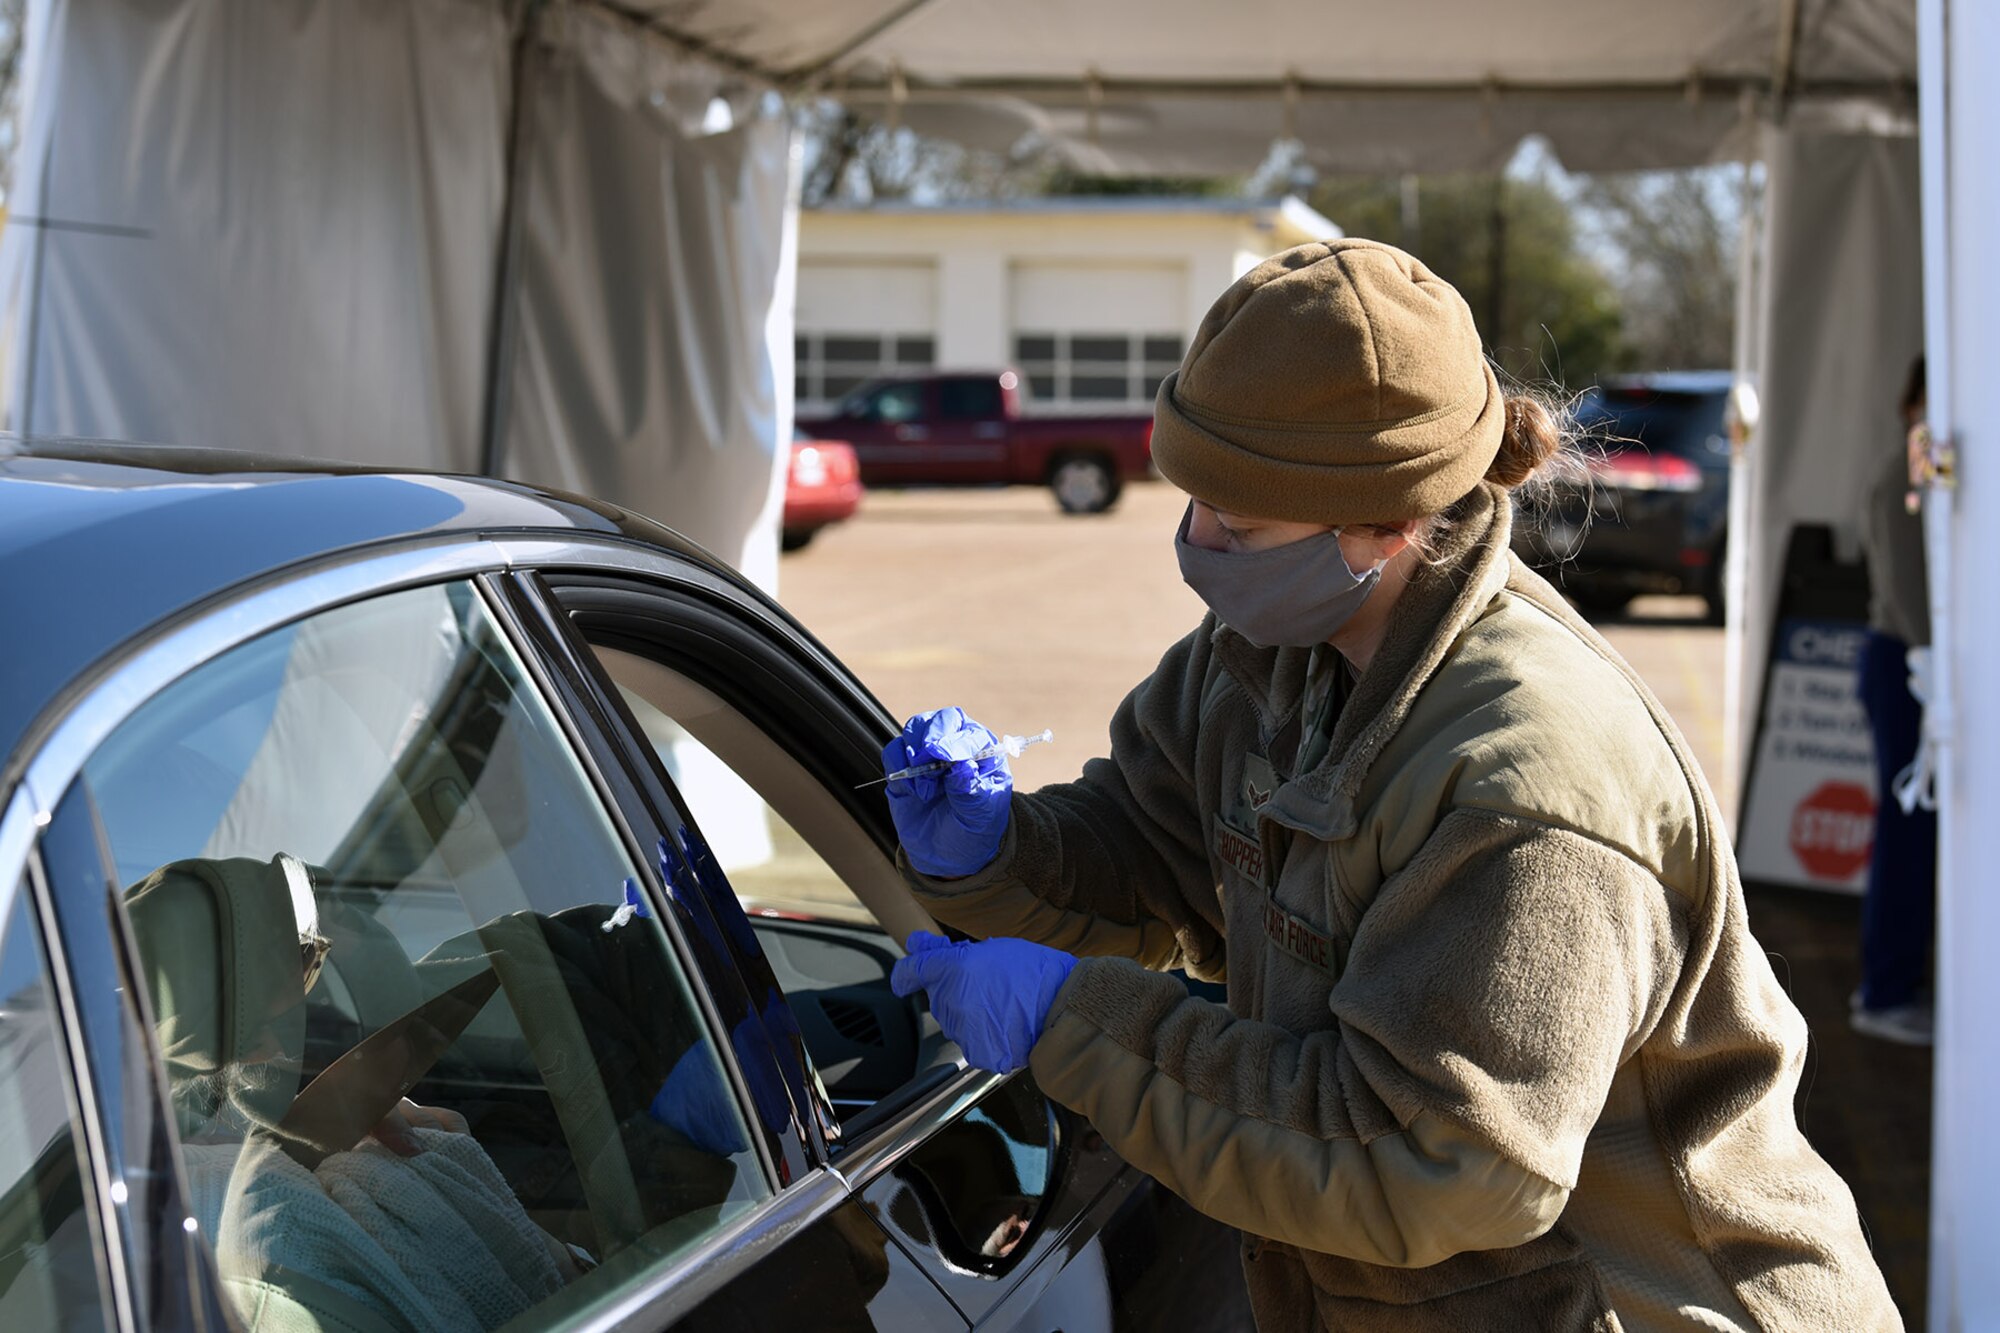 A member of the Louisiana National Guard prepares to vaccinate a citizen at a drive-thru COVID-19 vaccination site in January 2021. As of December 2021, the LANG had vaccinated 192,596 and tested 498,122 people throughout the state.